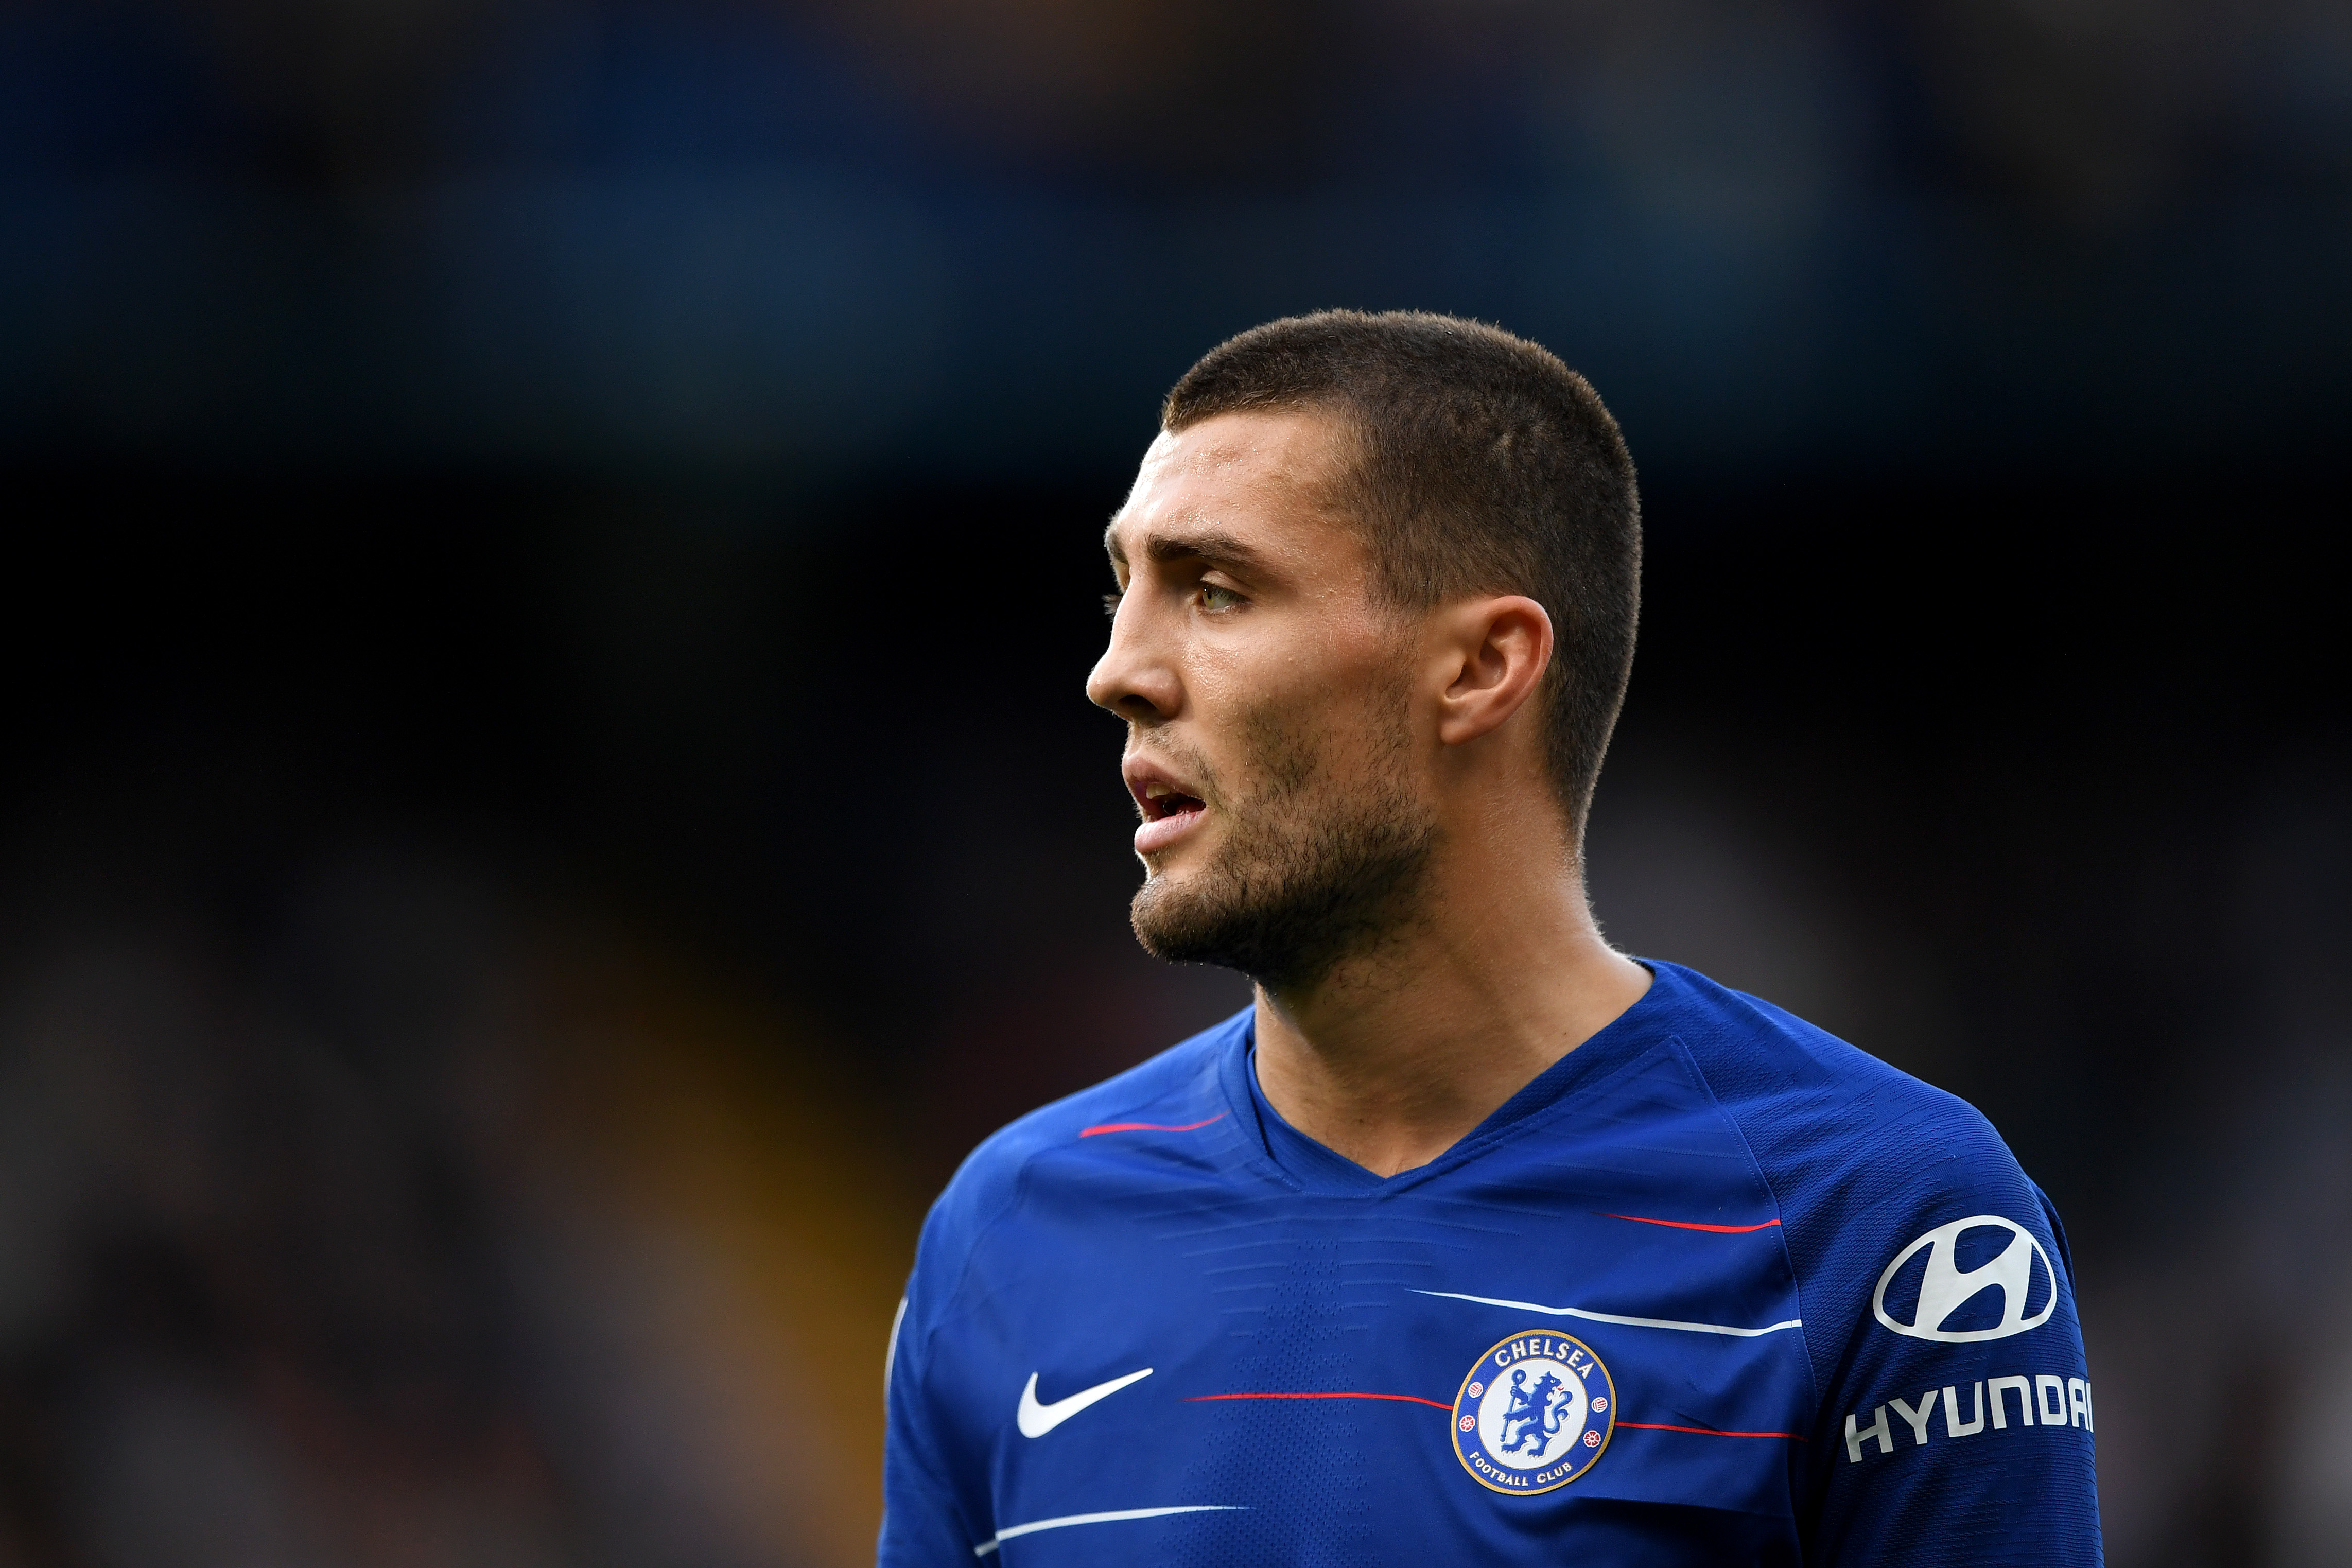 LONDON, ENGLAND - AUGUST 18:  Mateo Kovacic of Chelsea looks on during the Premier League match between Chelsea FC and Arsenal FC at Stamford Bridge on August 18, 2018 in London, United Kingdom.  (Photo by Shaun Botterill/Getty Images)